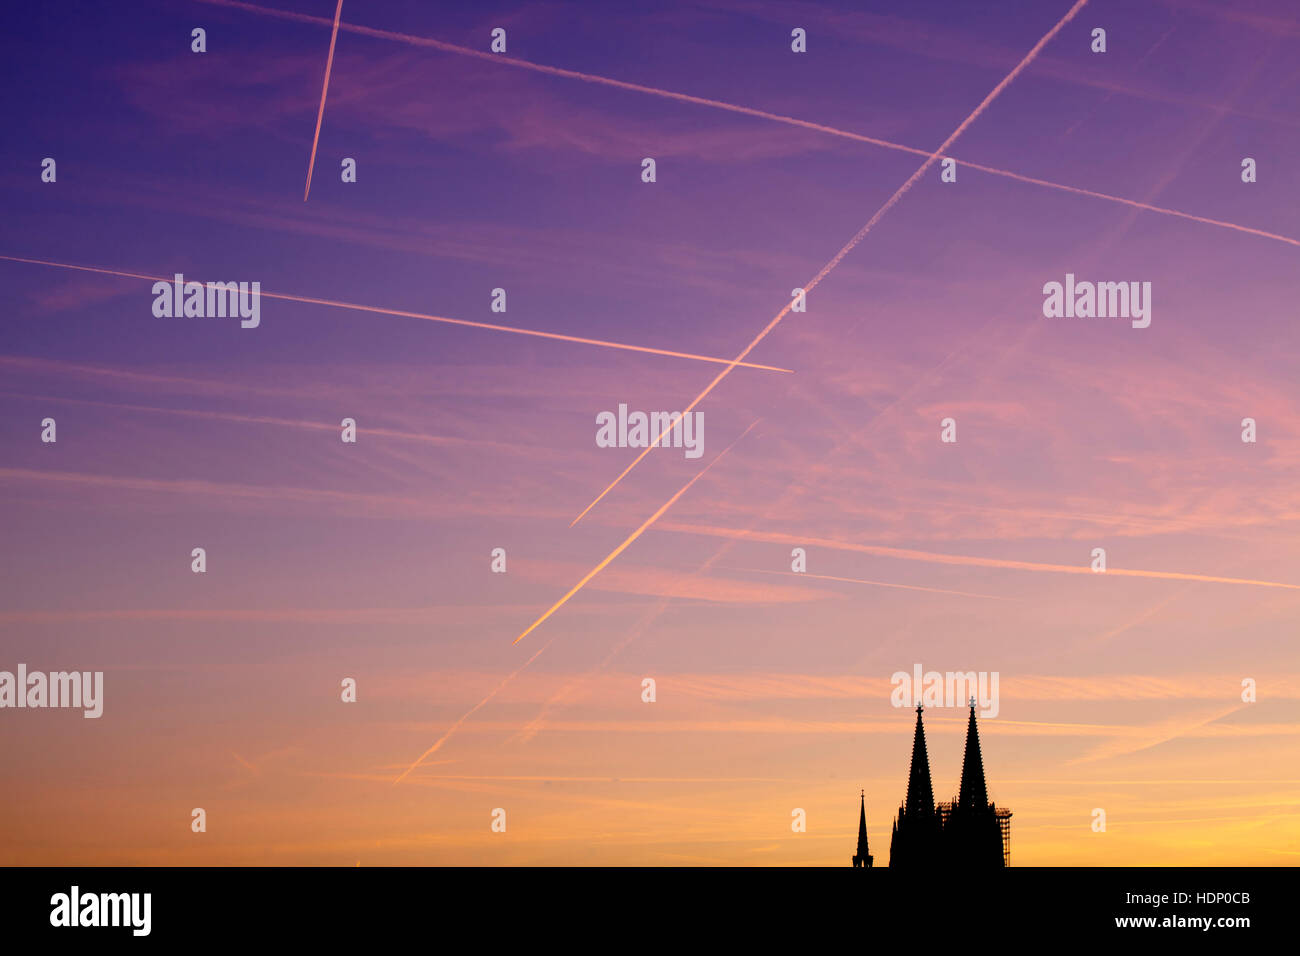 Europe, Germany, North Rhine-Westphalia, Cologne, condensation trails above Cologne cathedral. Stock Photo